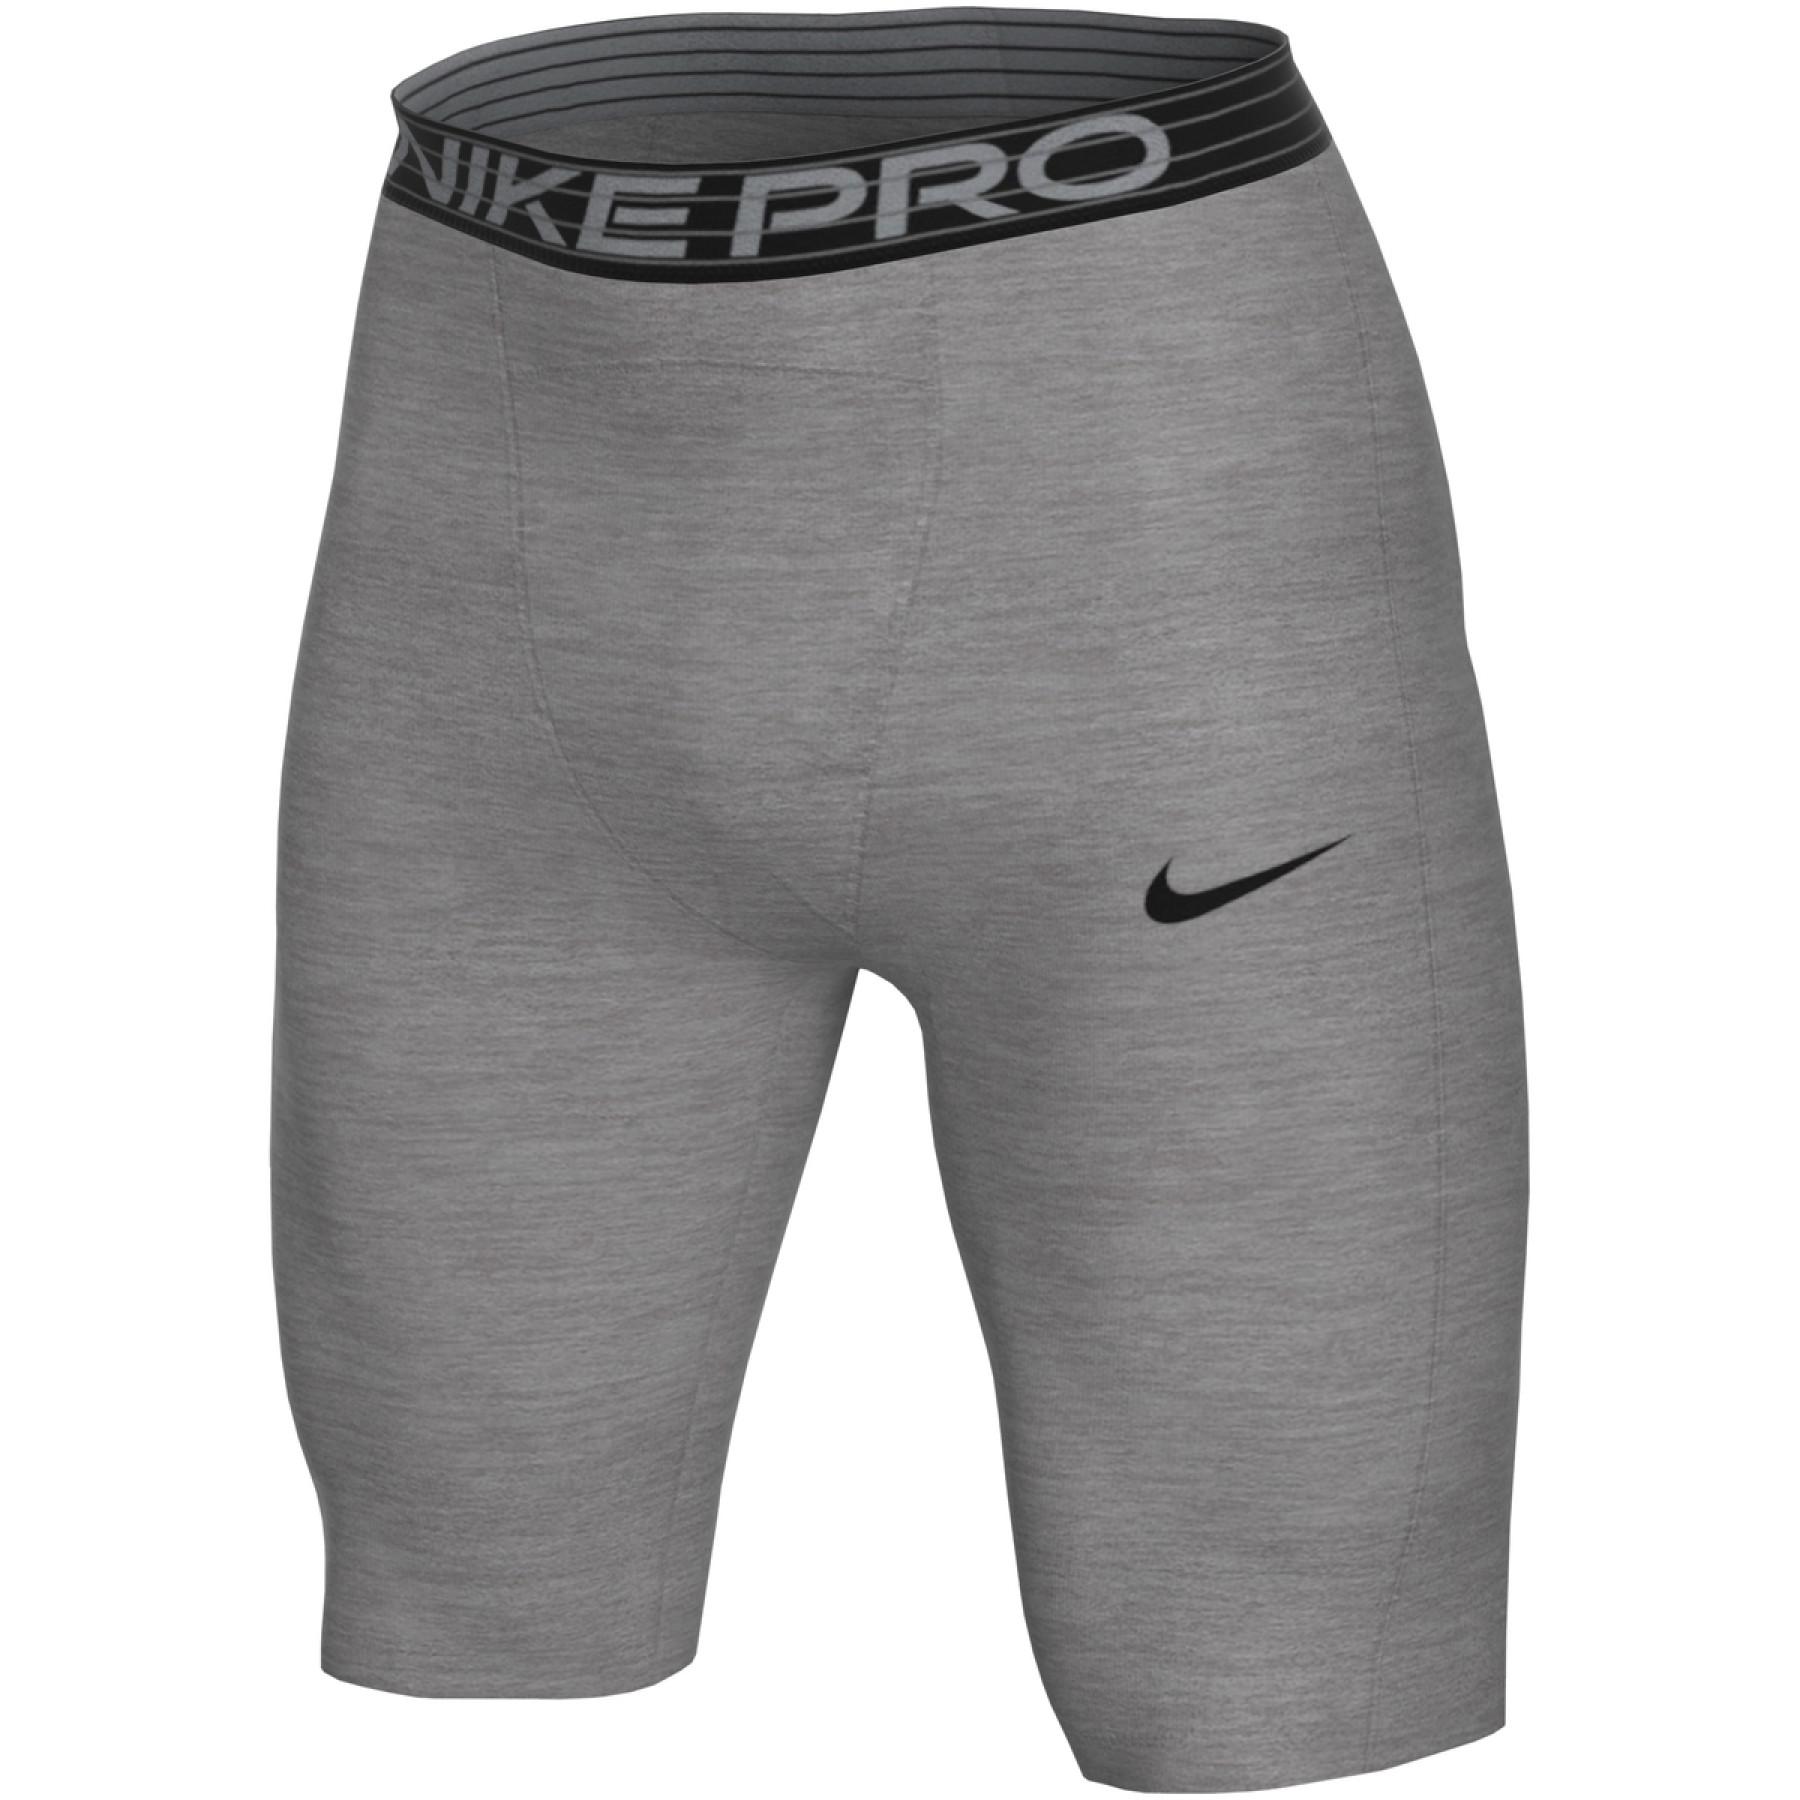 their To disable projector Short Nike Pro